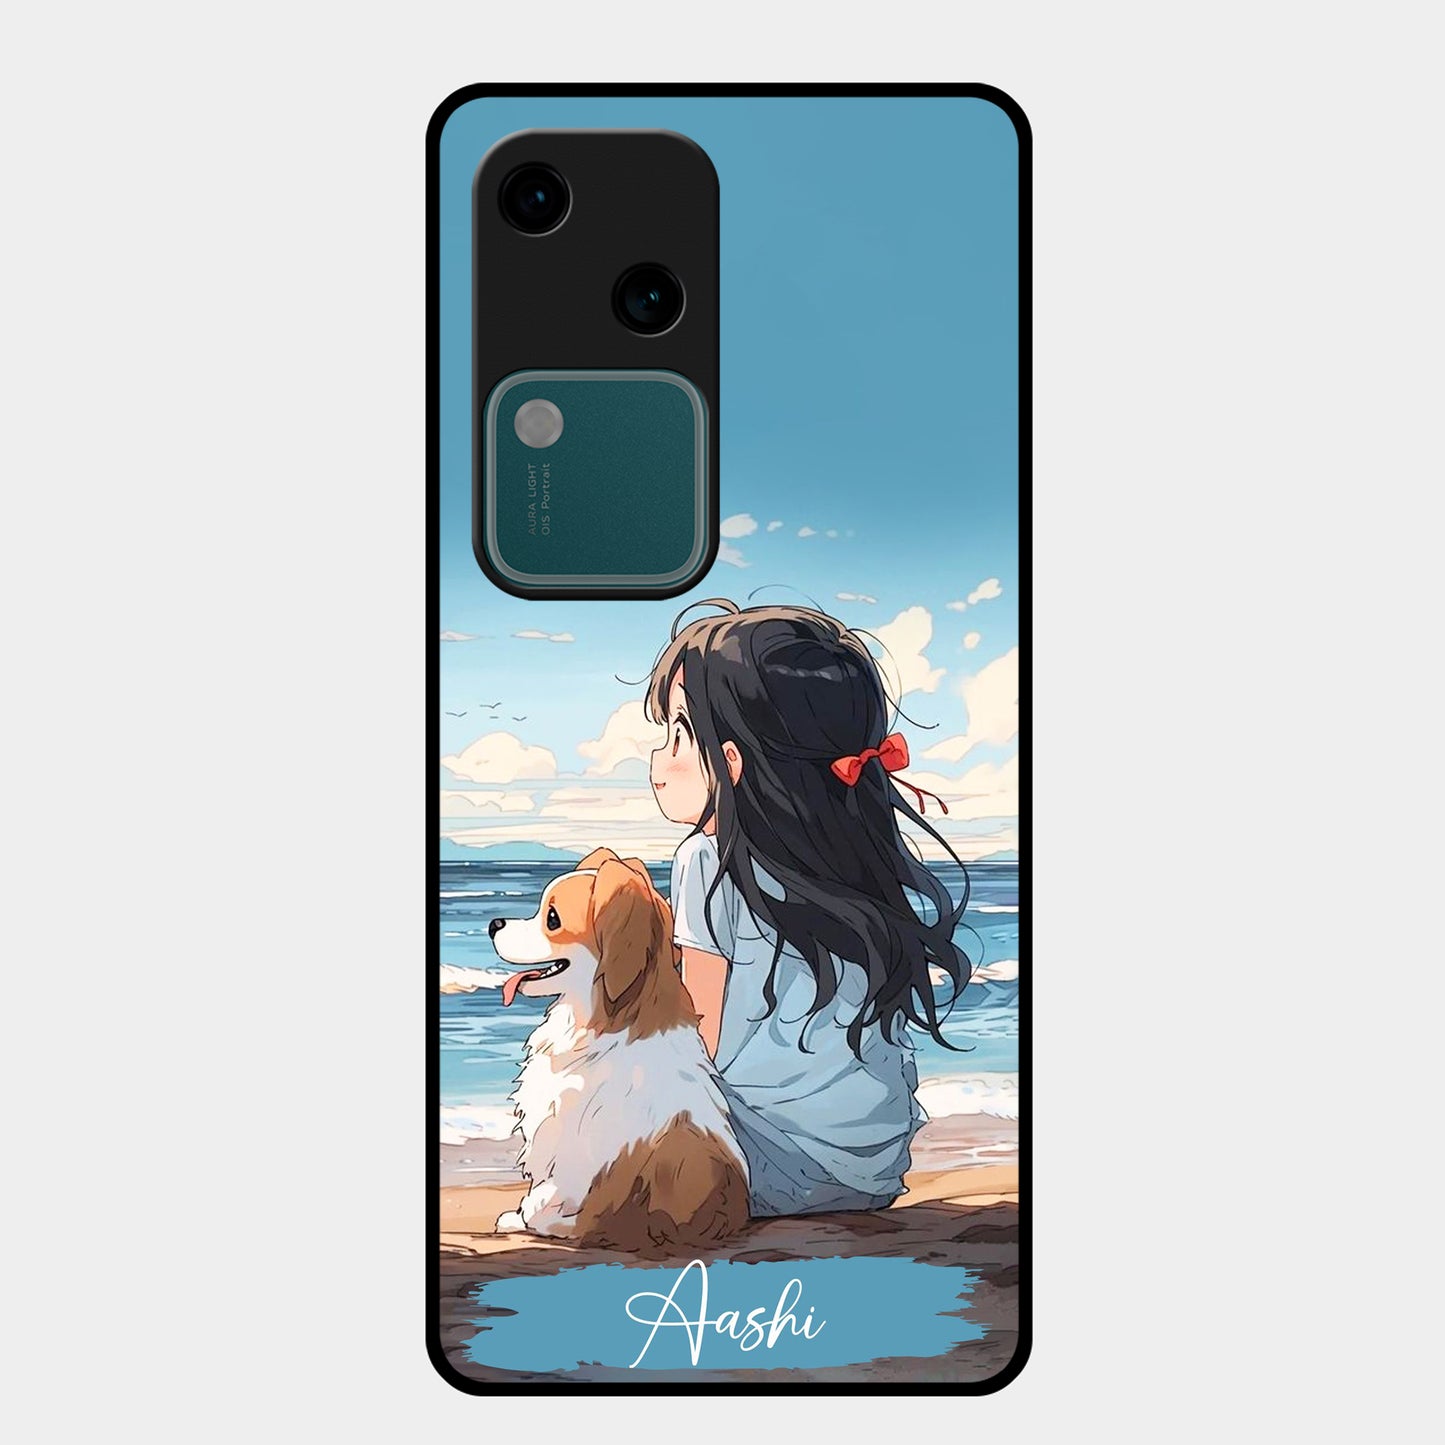 Girl With Dog Glossy Metal Case Cover For Vivo